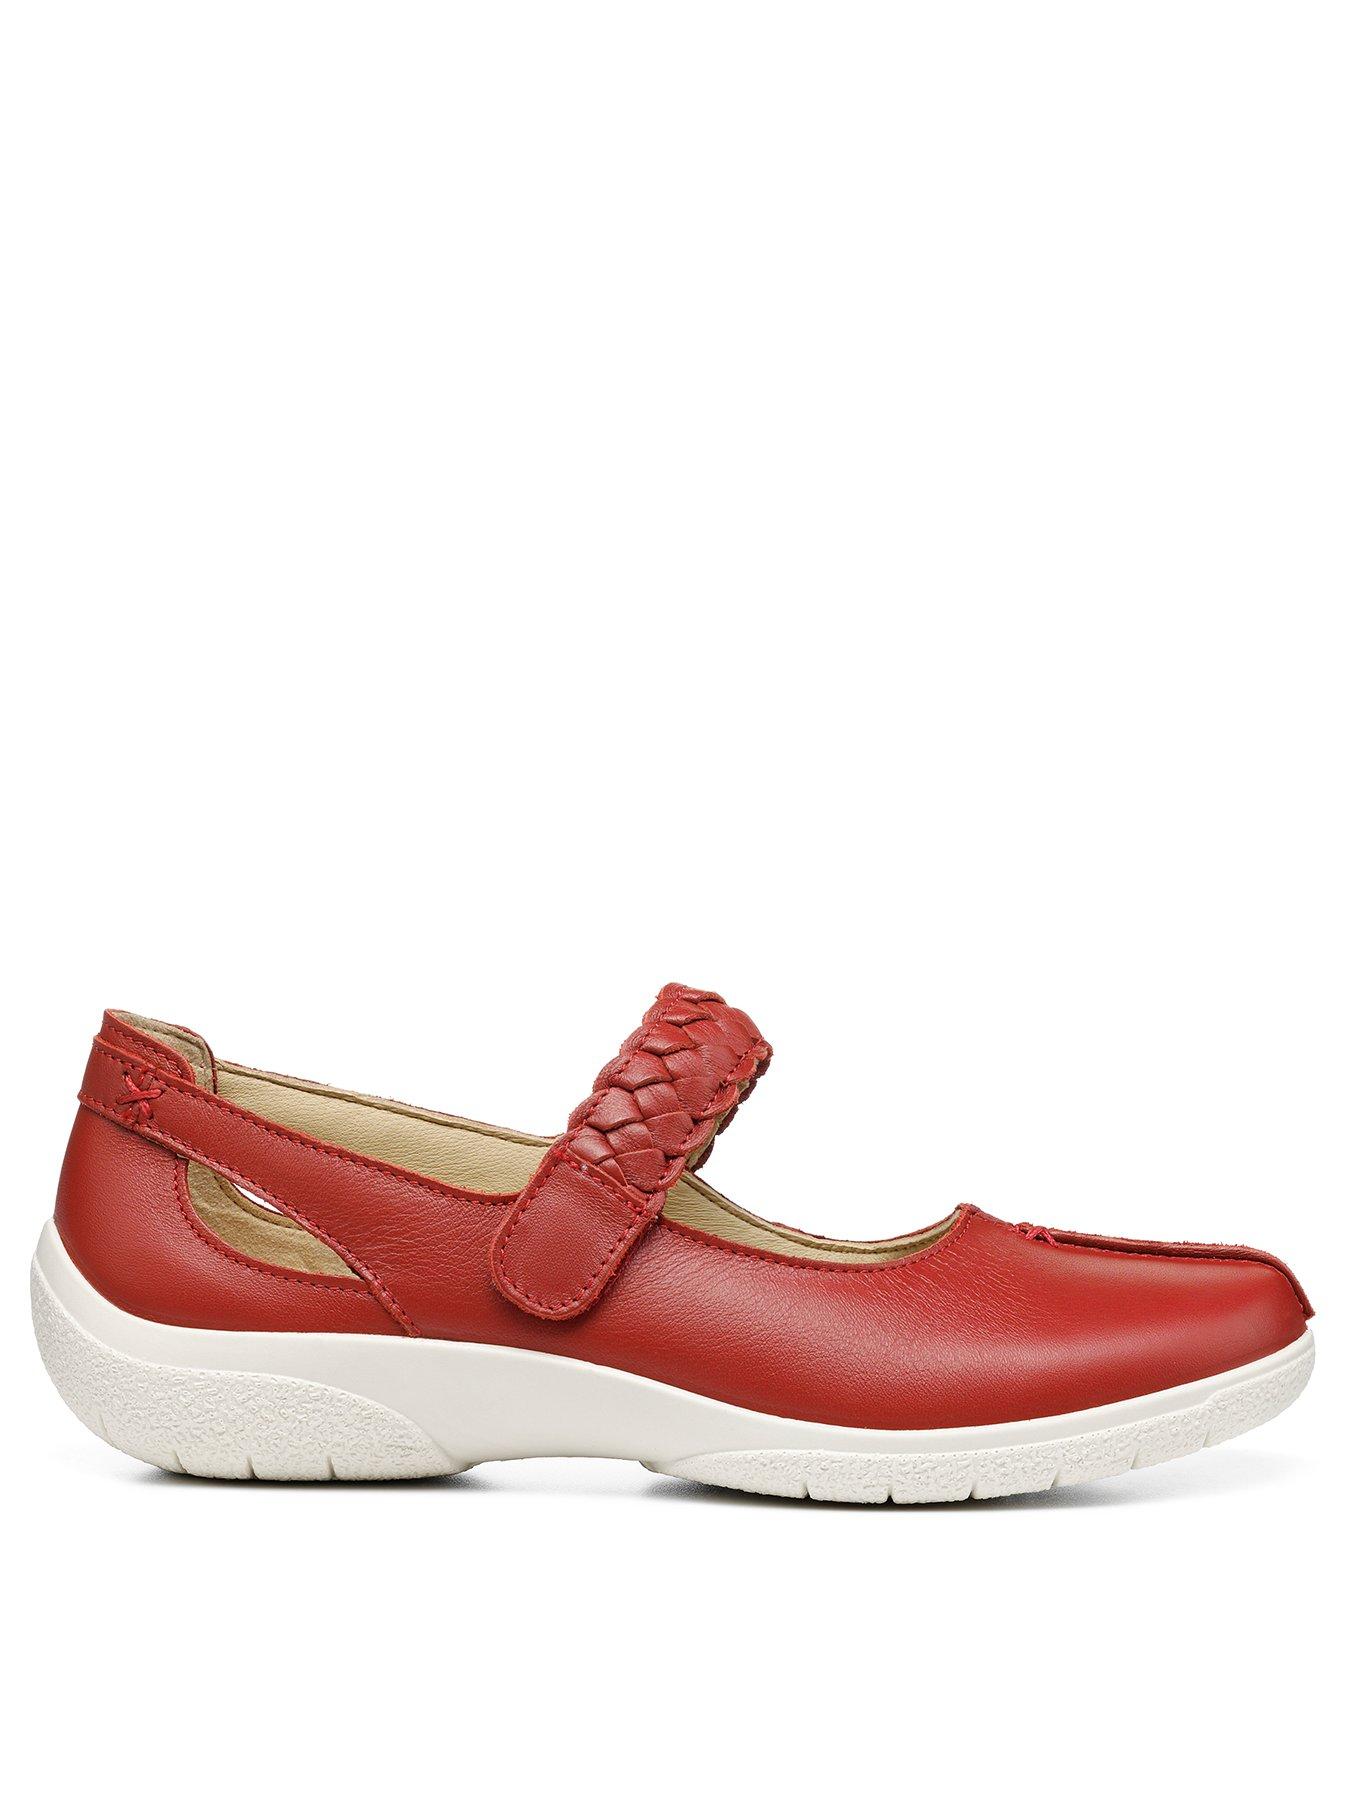 Women Shake Extra Wide Flat Shoes - Red